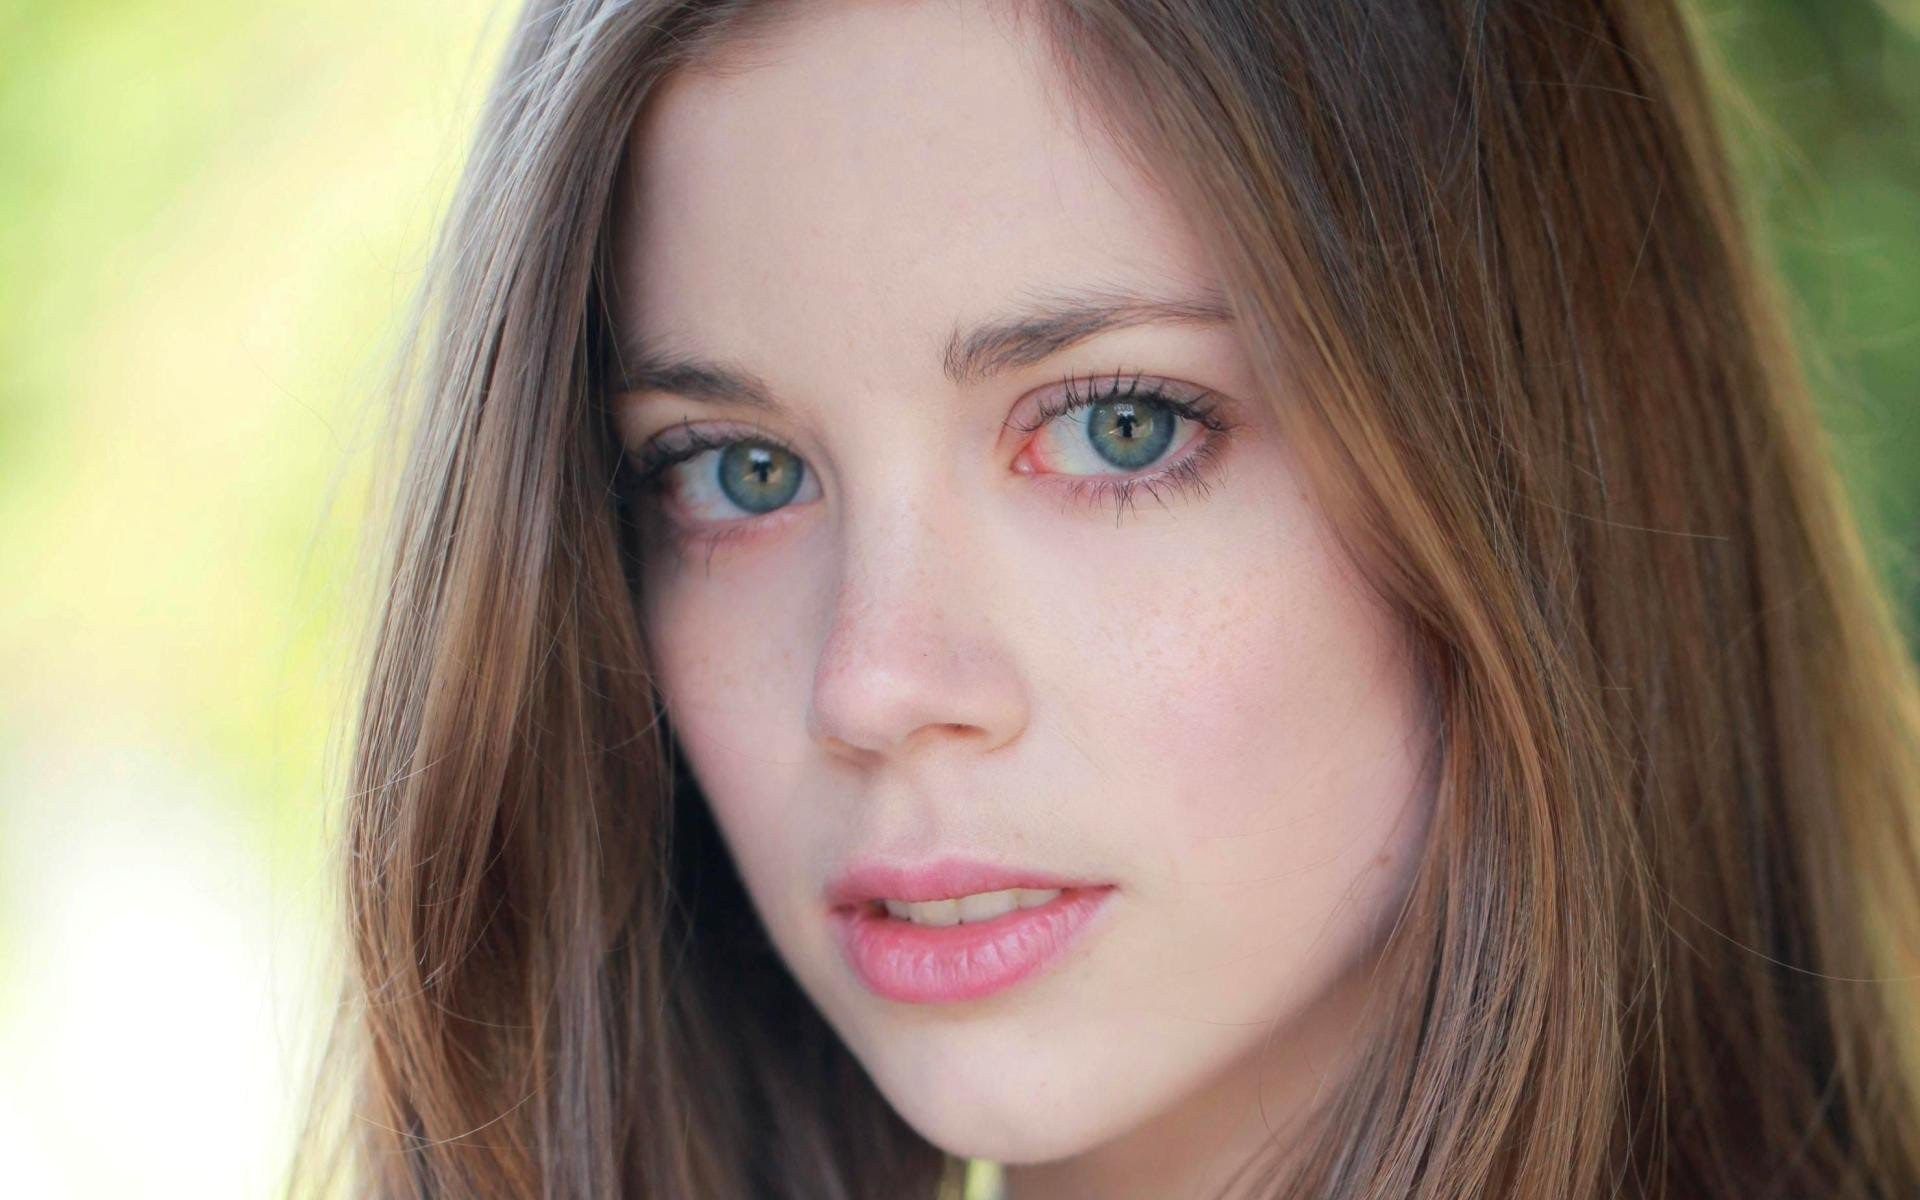 Charlotte Hope Wallpaper Image Photo Picture Background